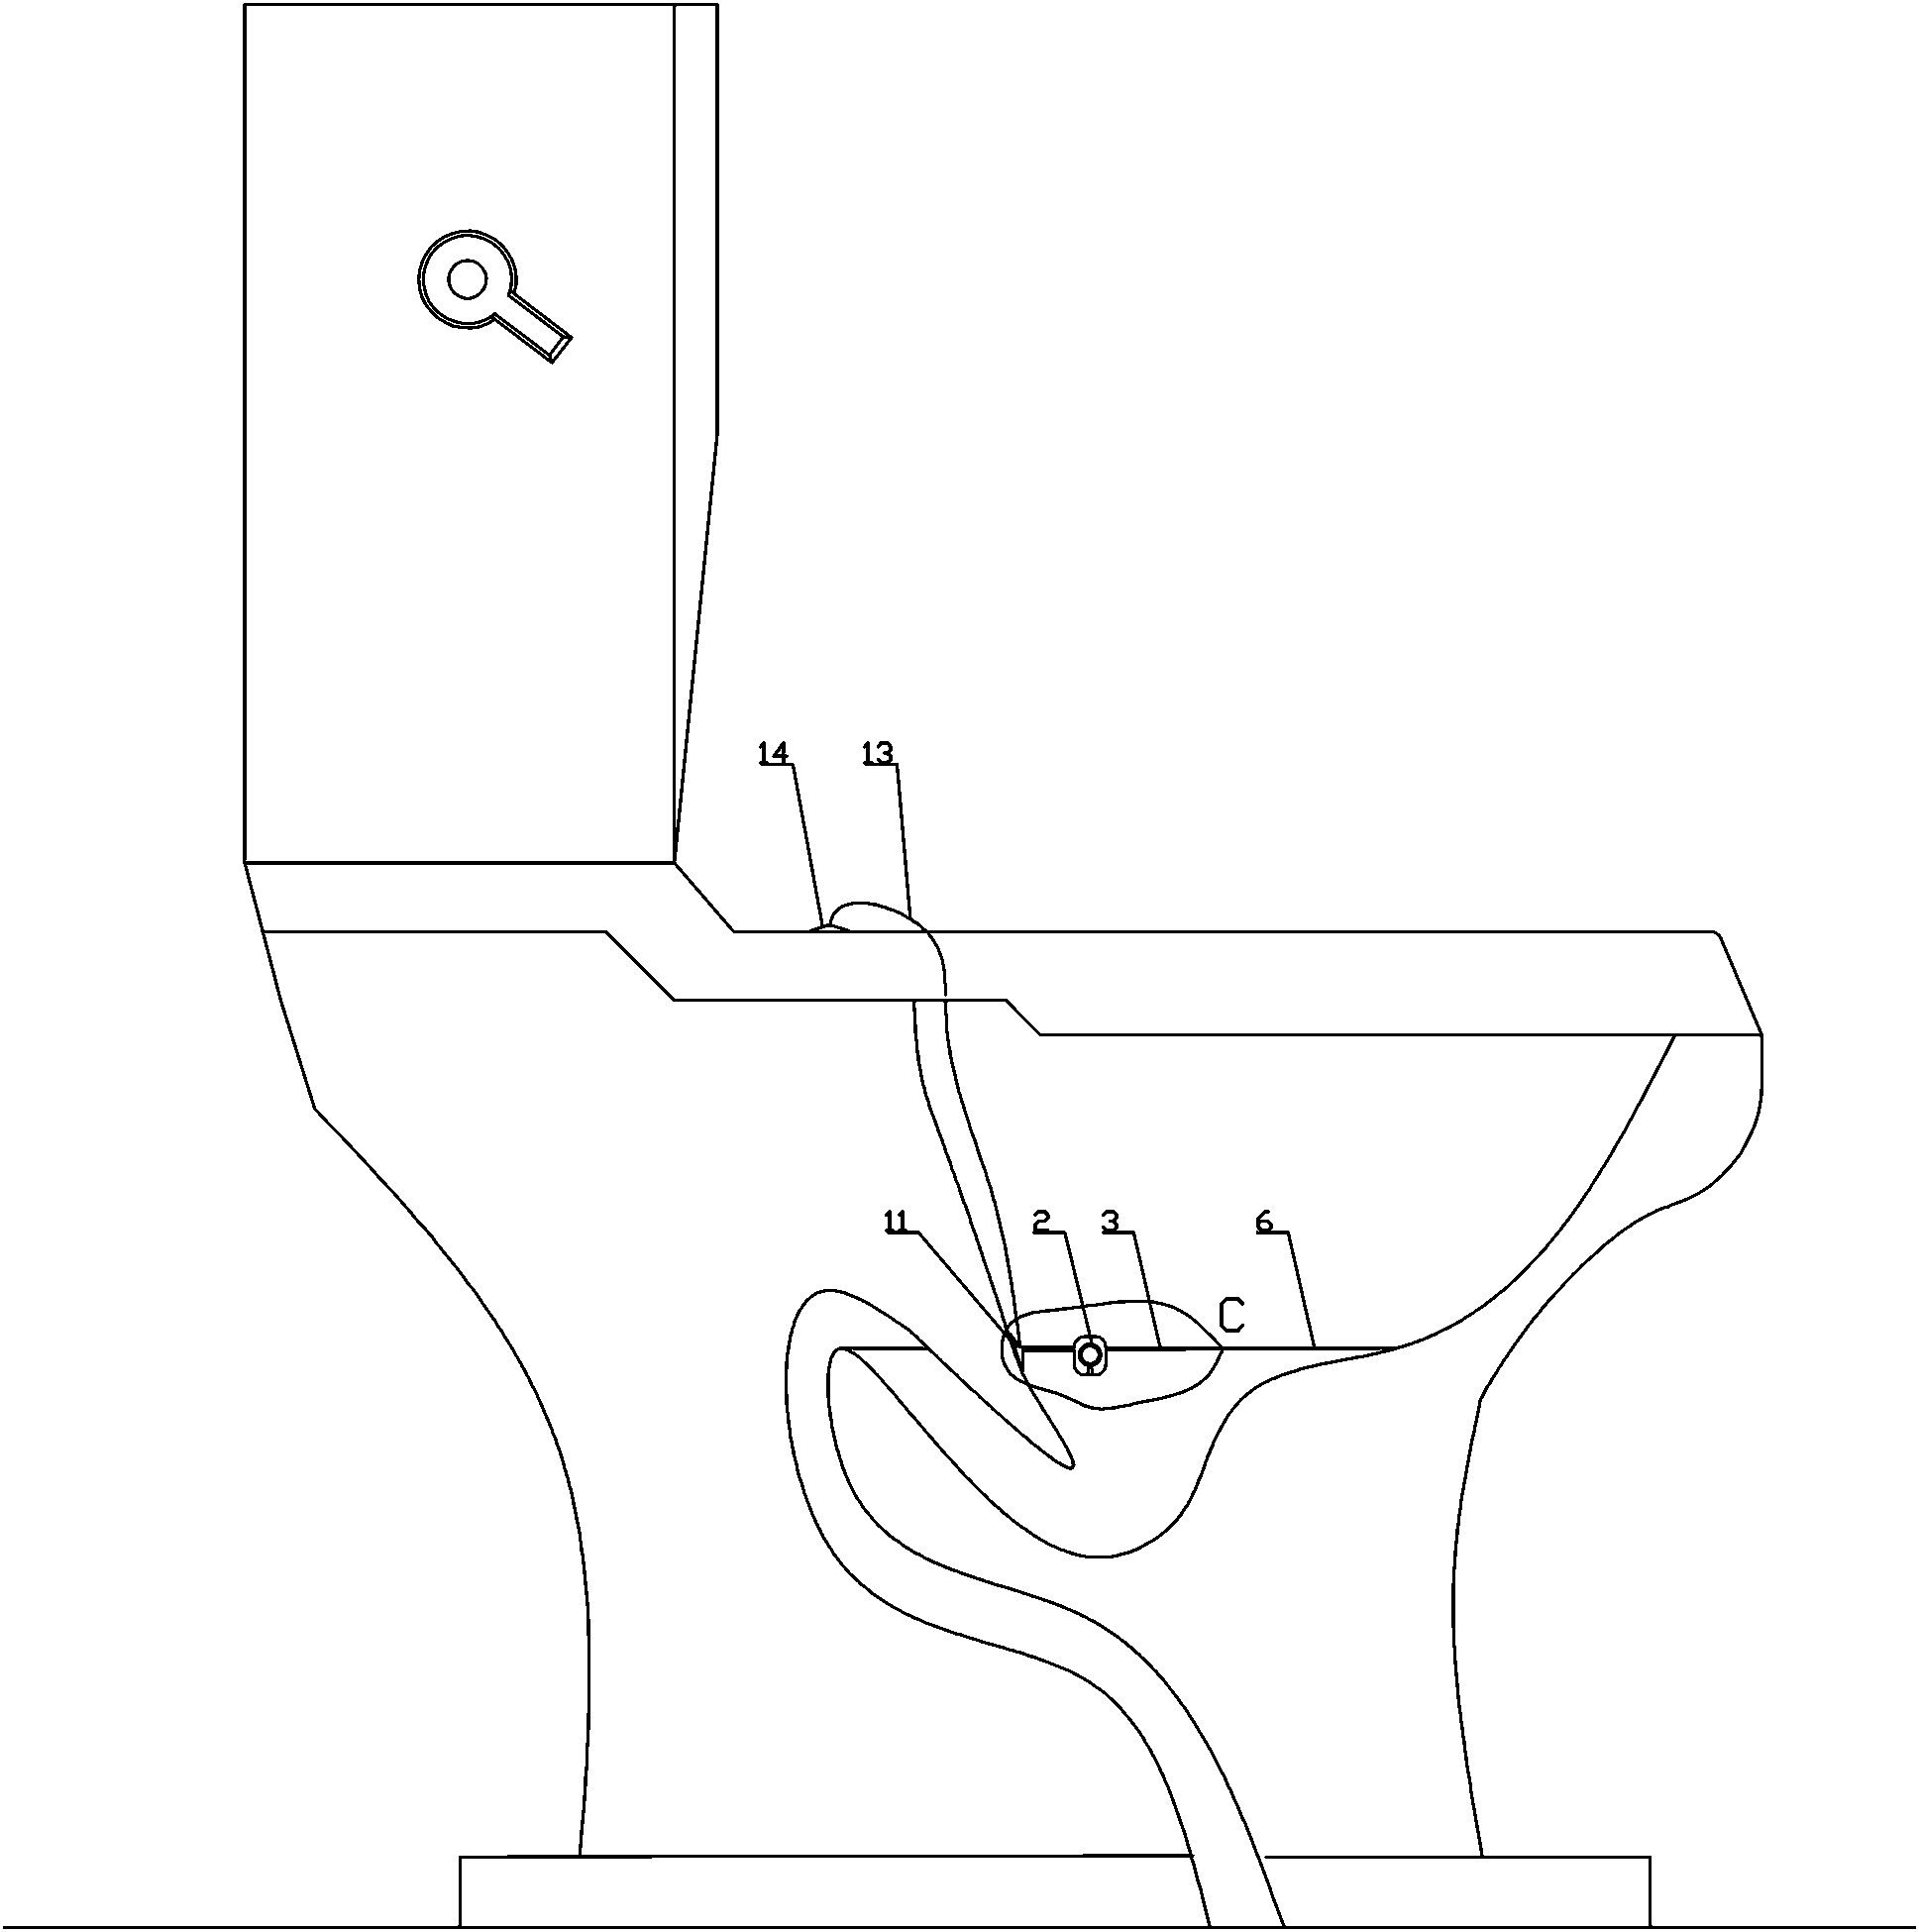 Sputtering prevention device for closestool